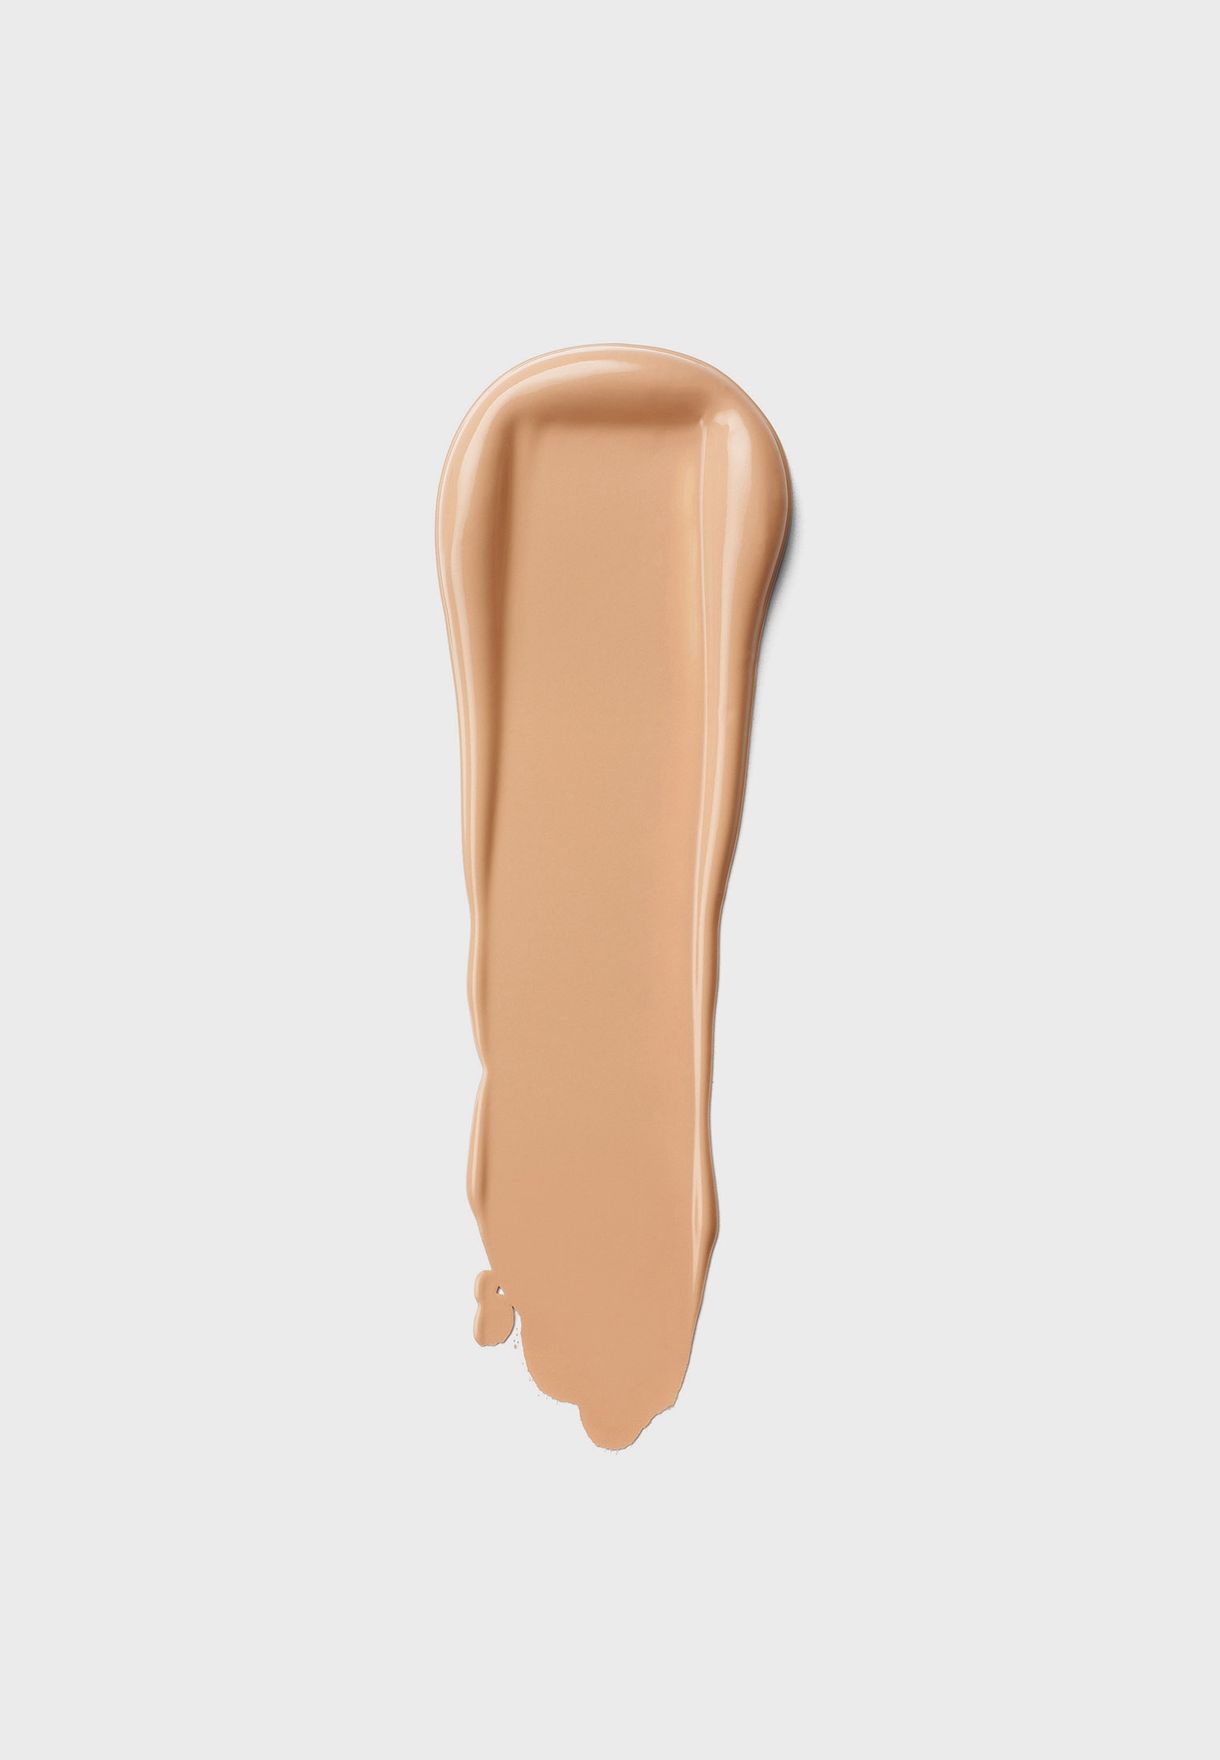 Beyond Perfecting Foundation +Concealer -Neutral